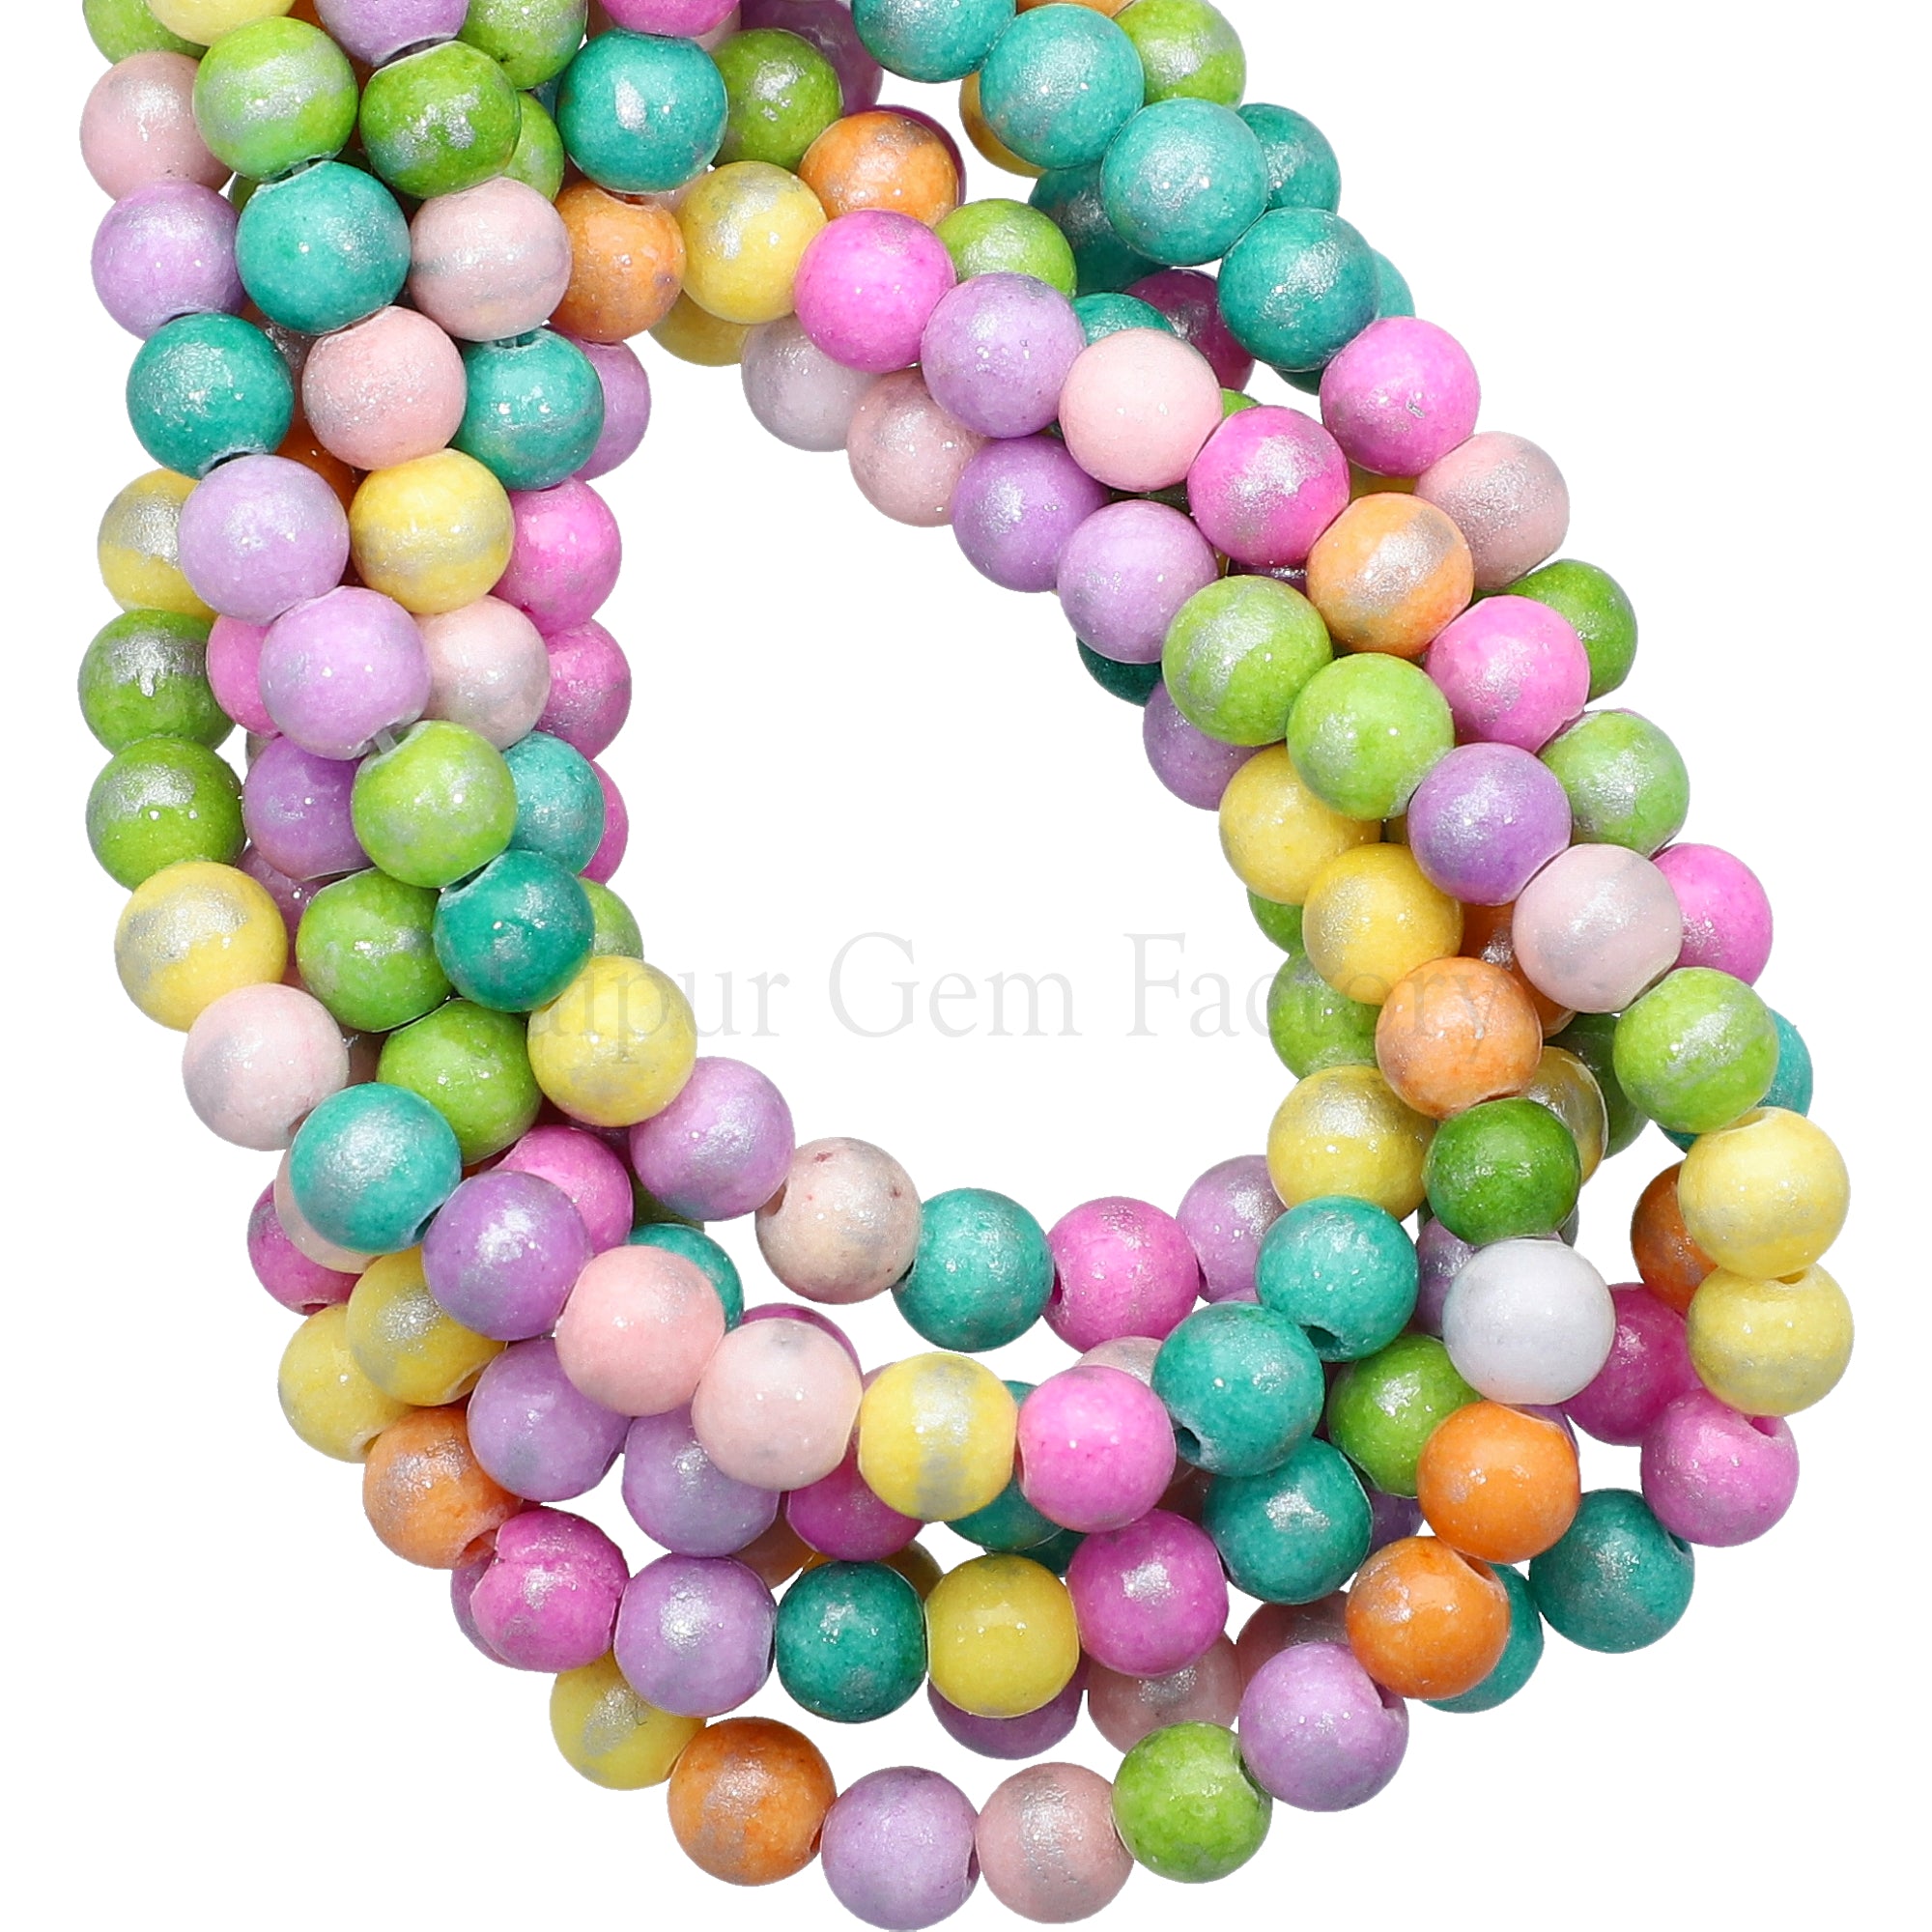 6 MM Multi Mix Color Silver Leafed Jade Smooth Round Beads 15 Inches Strand